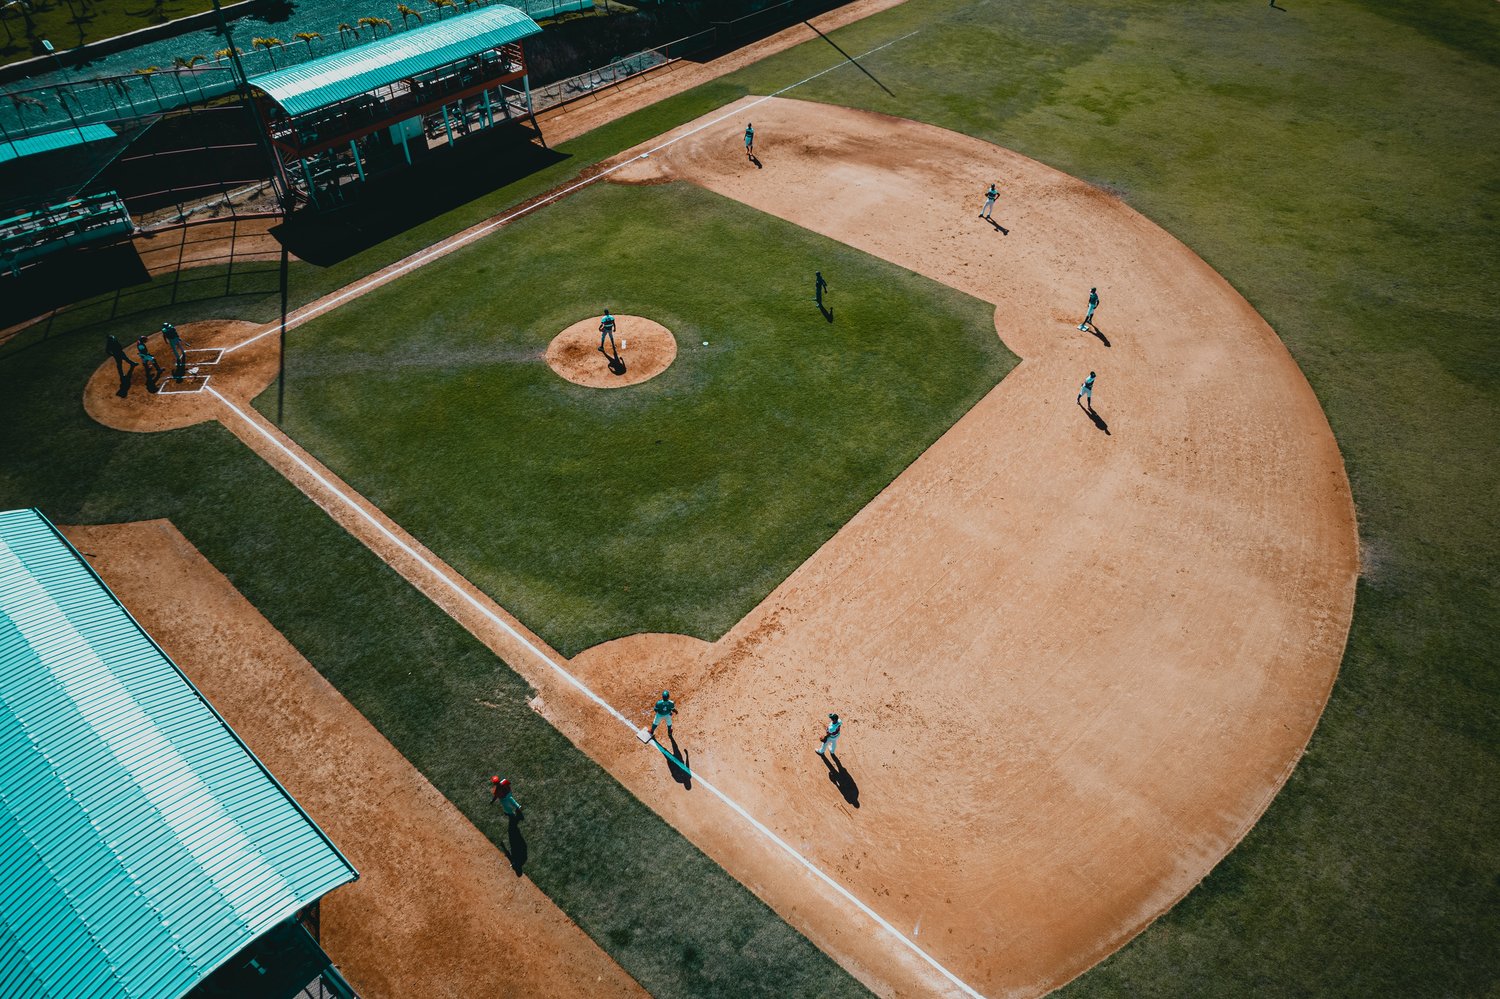 An aerial view of people playing softball on a softball field 